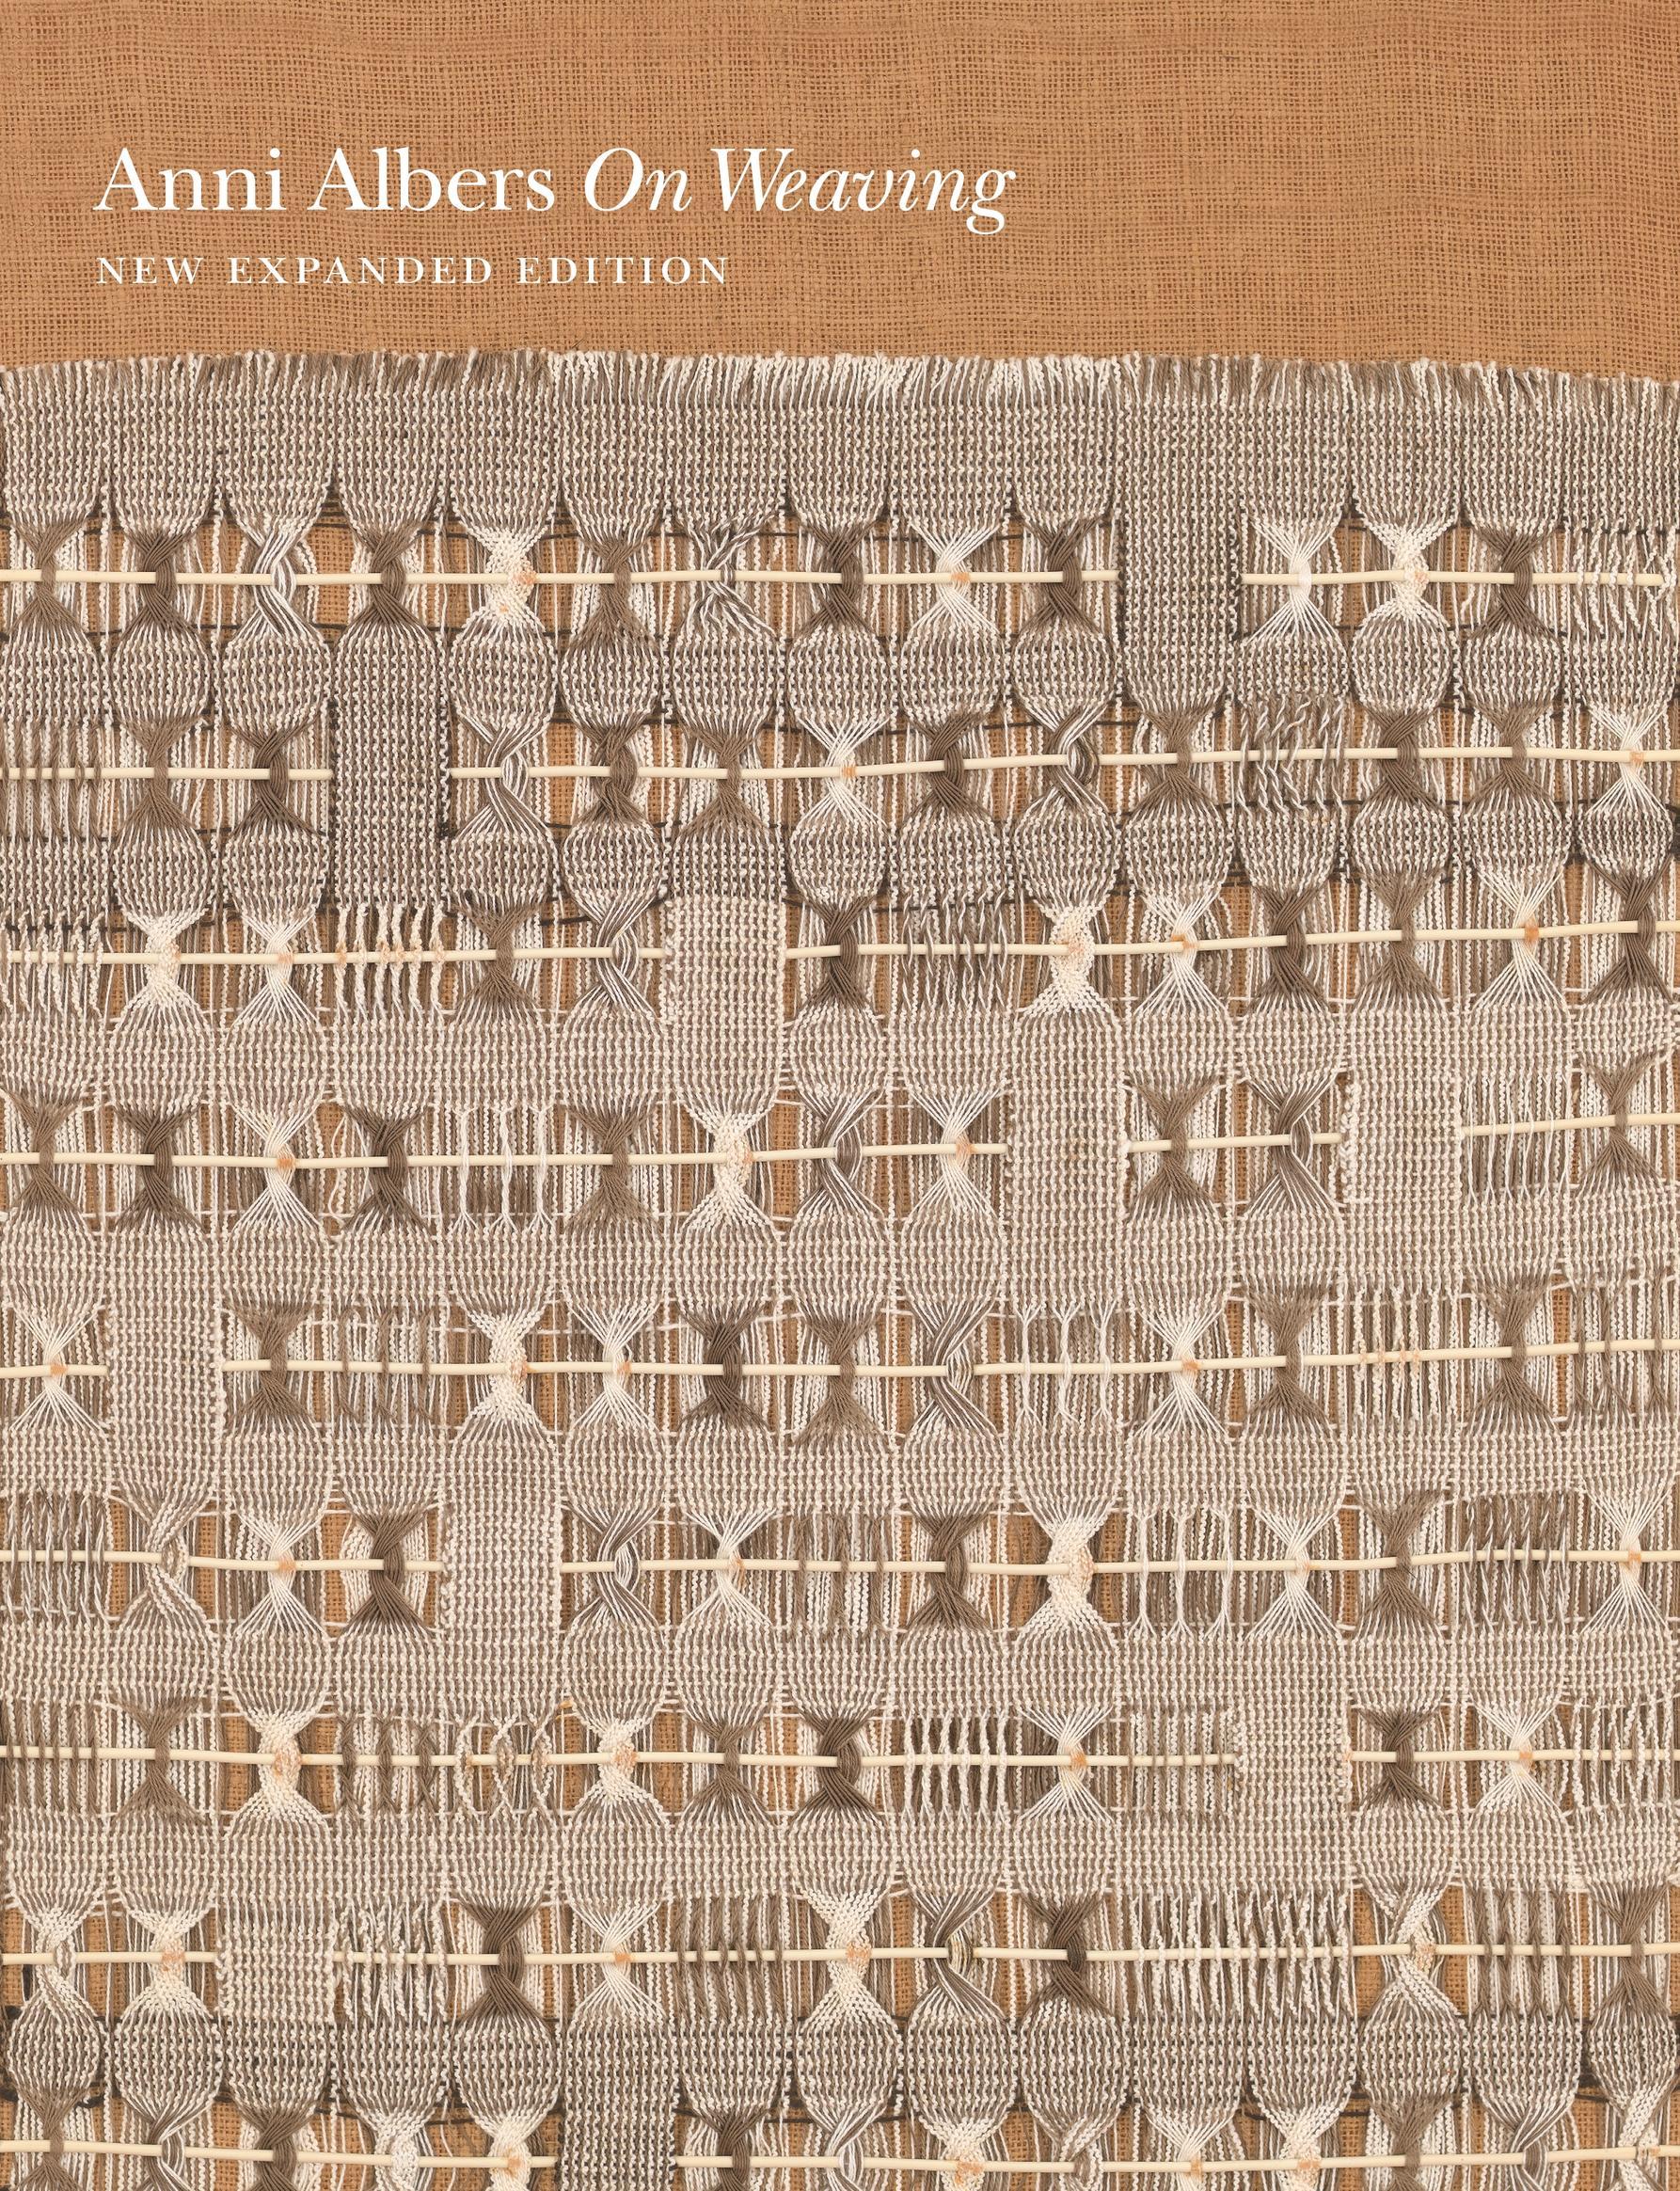 On Weaving / Anni Albers / Buch / Englisch / 2017 / Princeton Univers. Press / EAN 9780691177854 - Albers, Anni